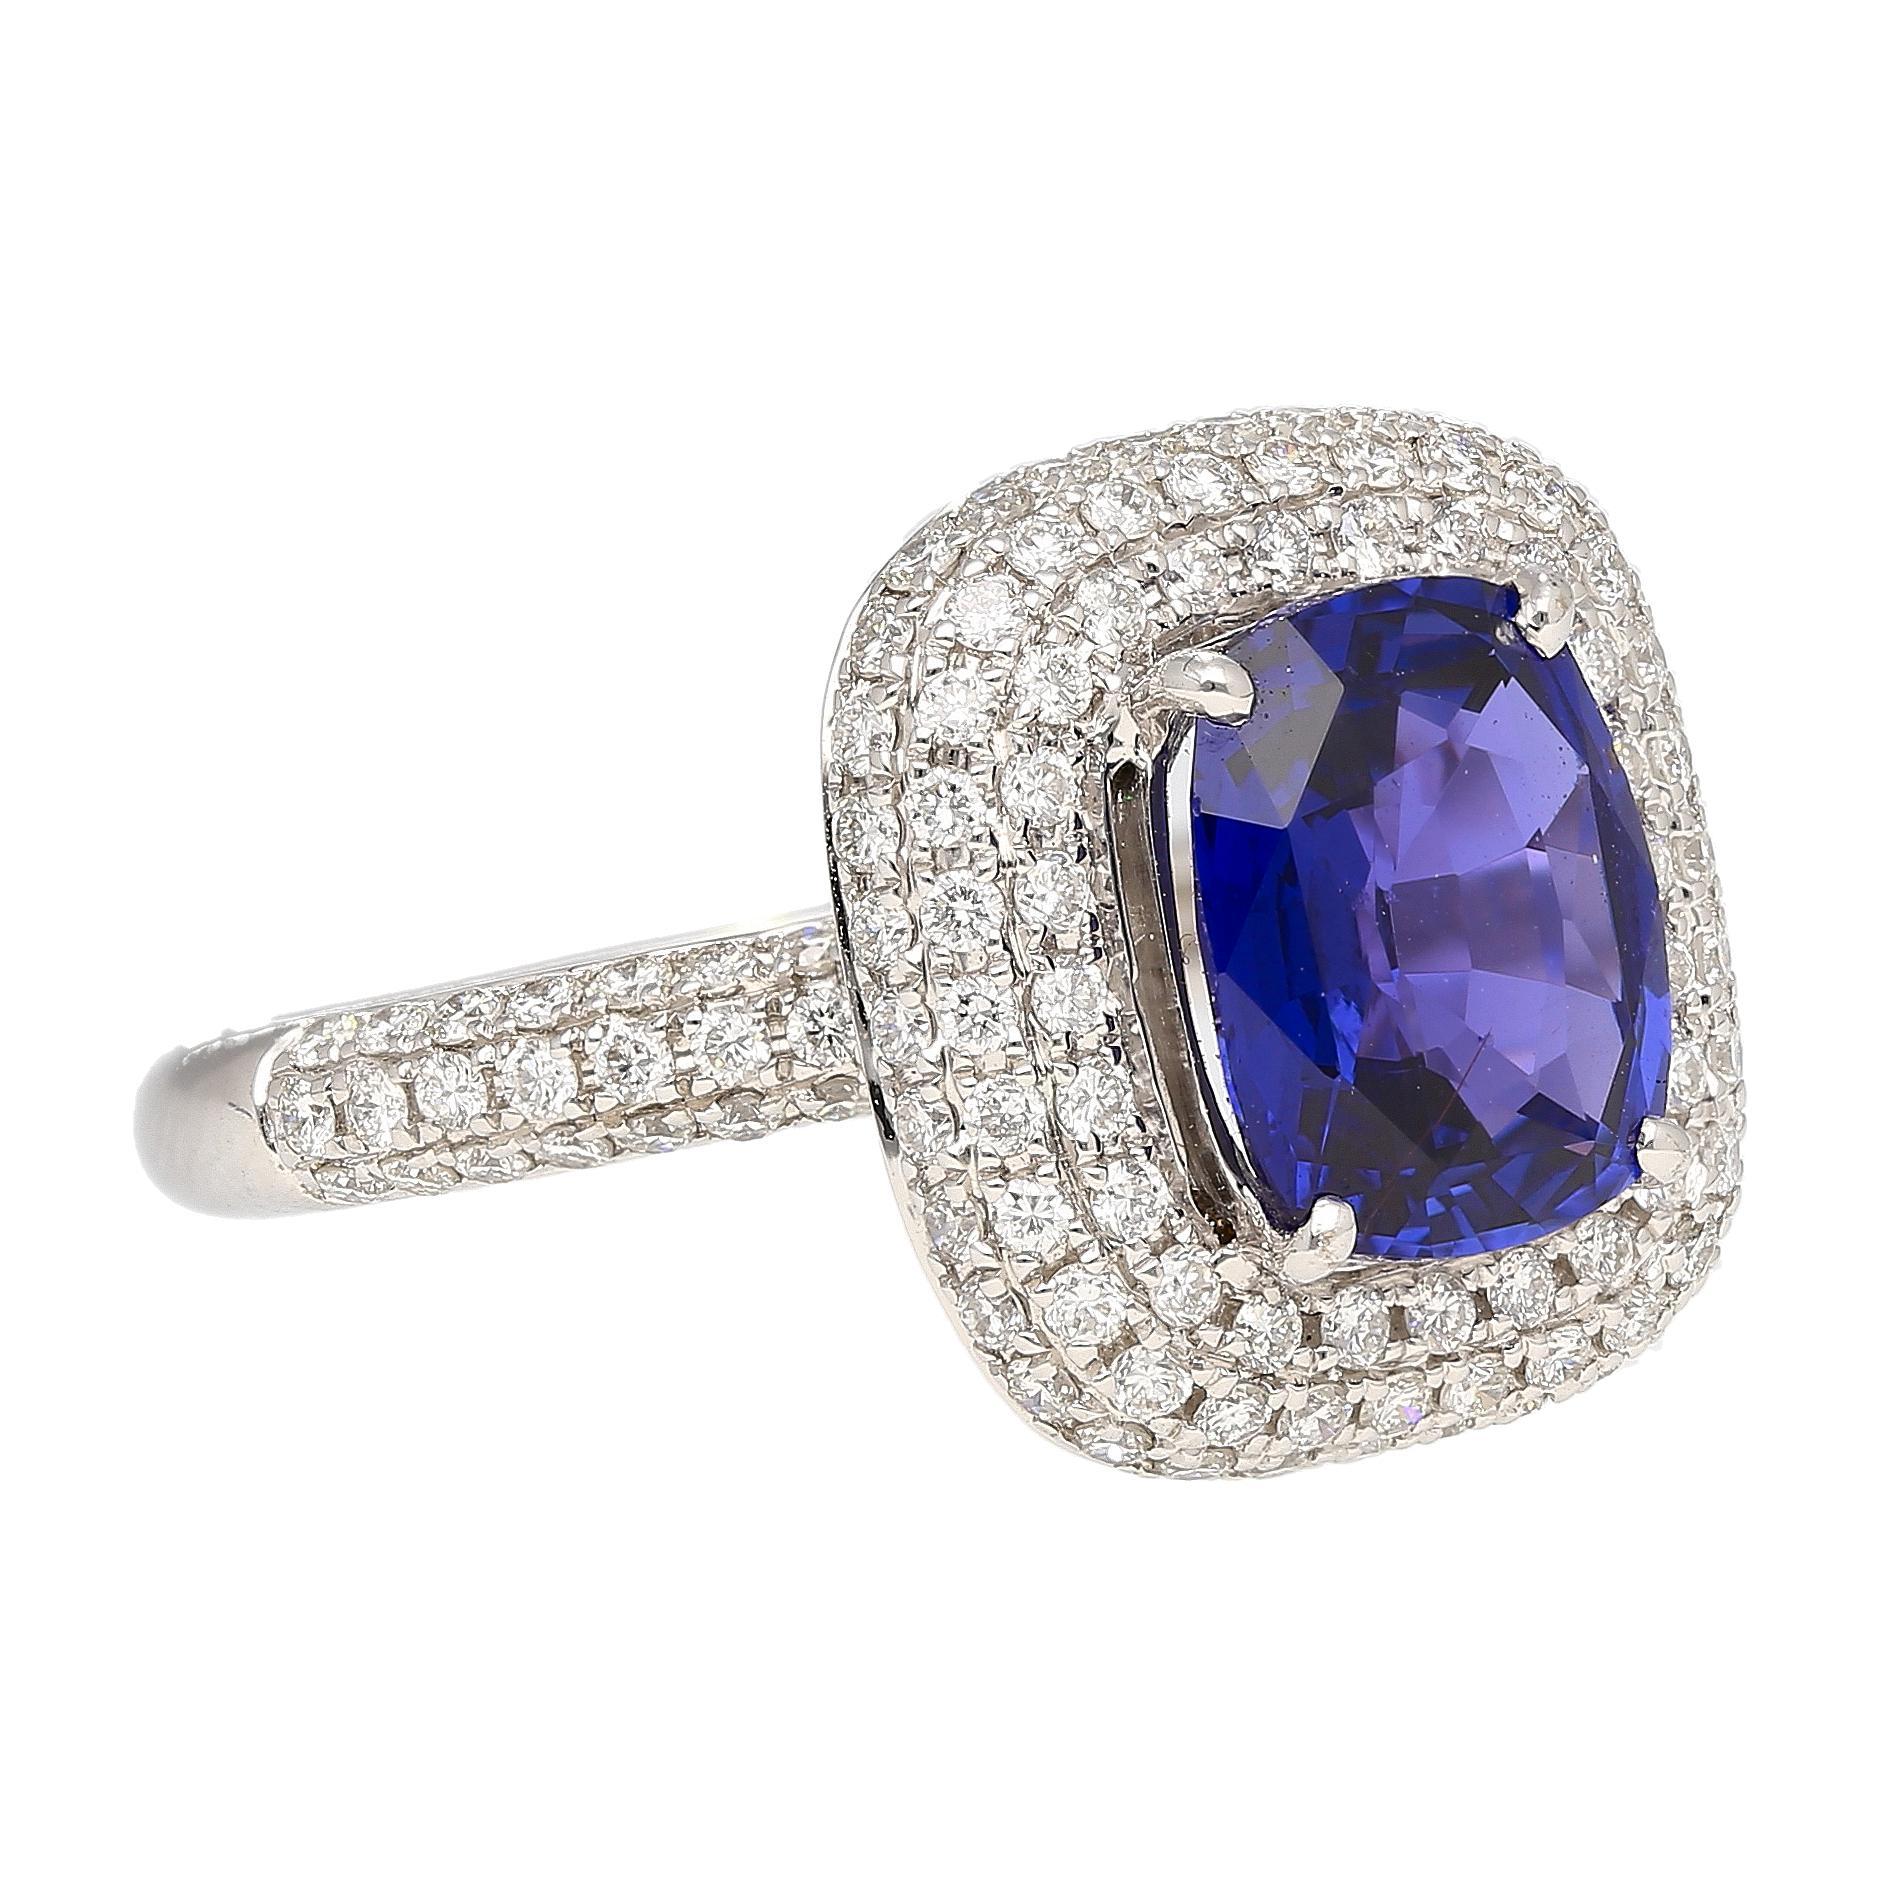 GIA Certified No Heat Color Change 3.25 Carat Violet-Blue Sapphire Ring For Sale 2